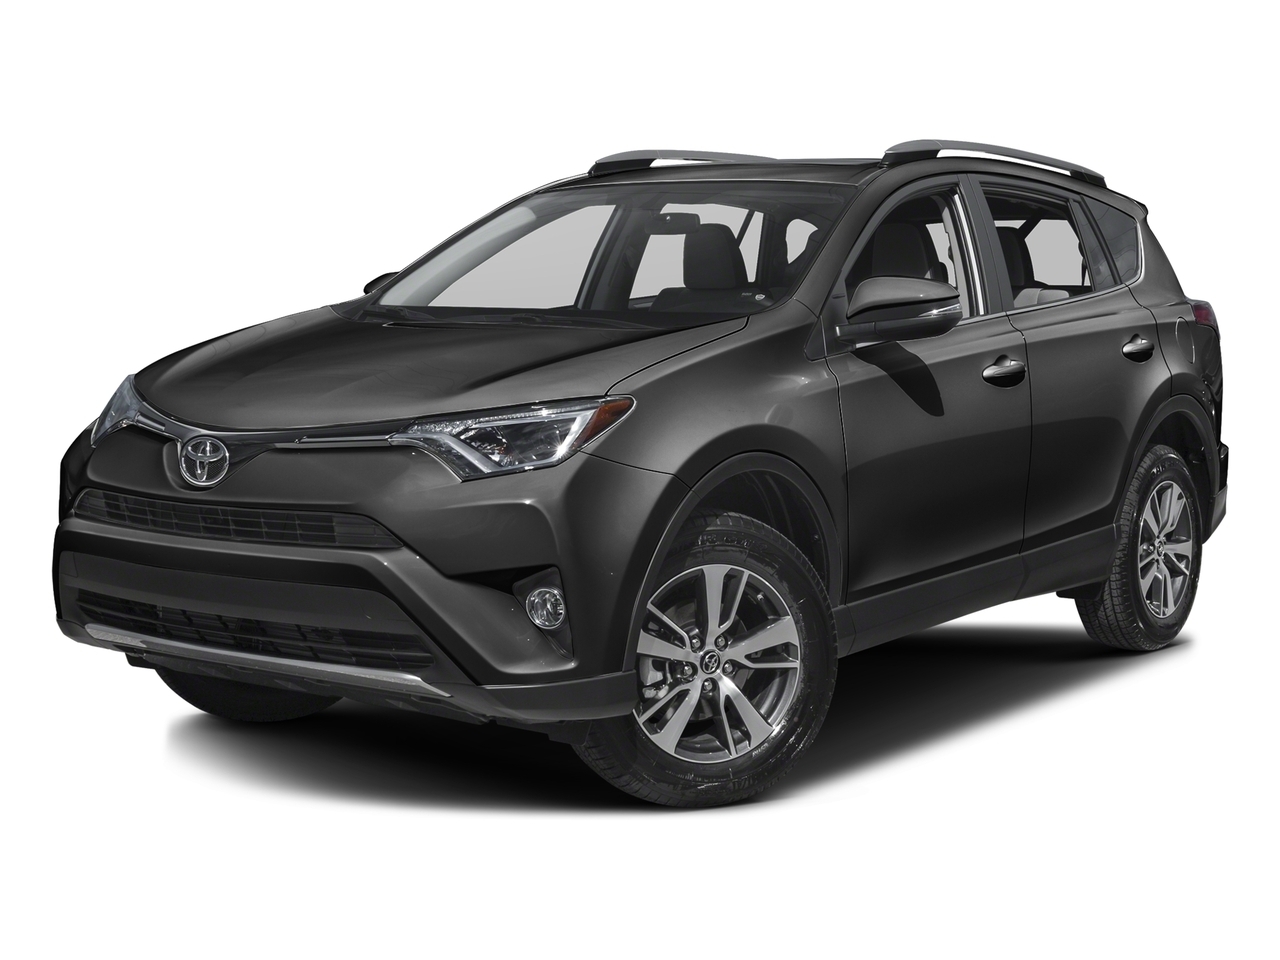 2017 Toyota RAV4 AWD XLE| Sunroof/PWR Tailgate/No Accidents, Mint!